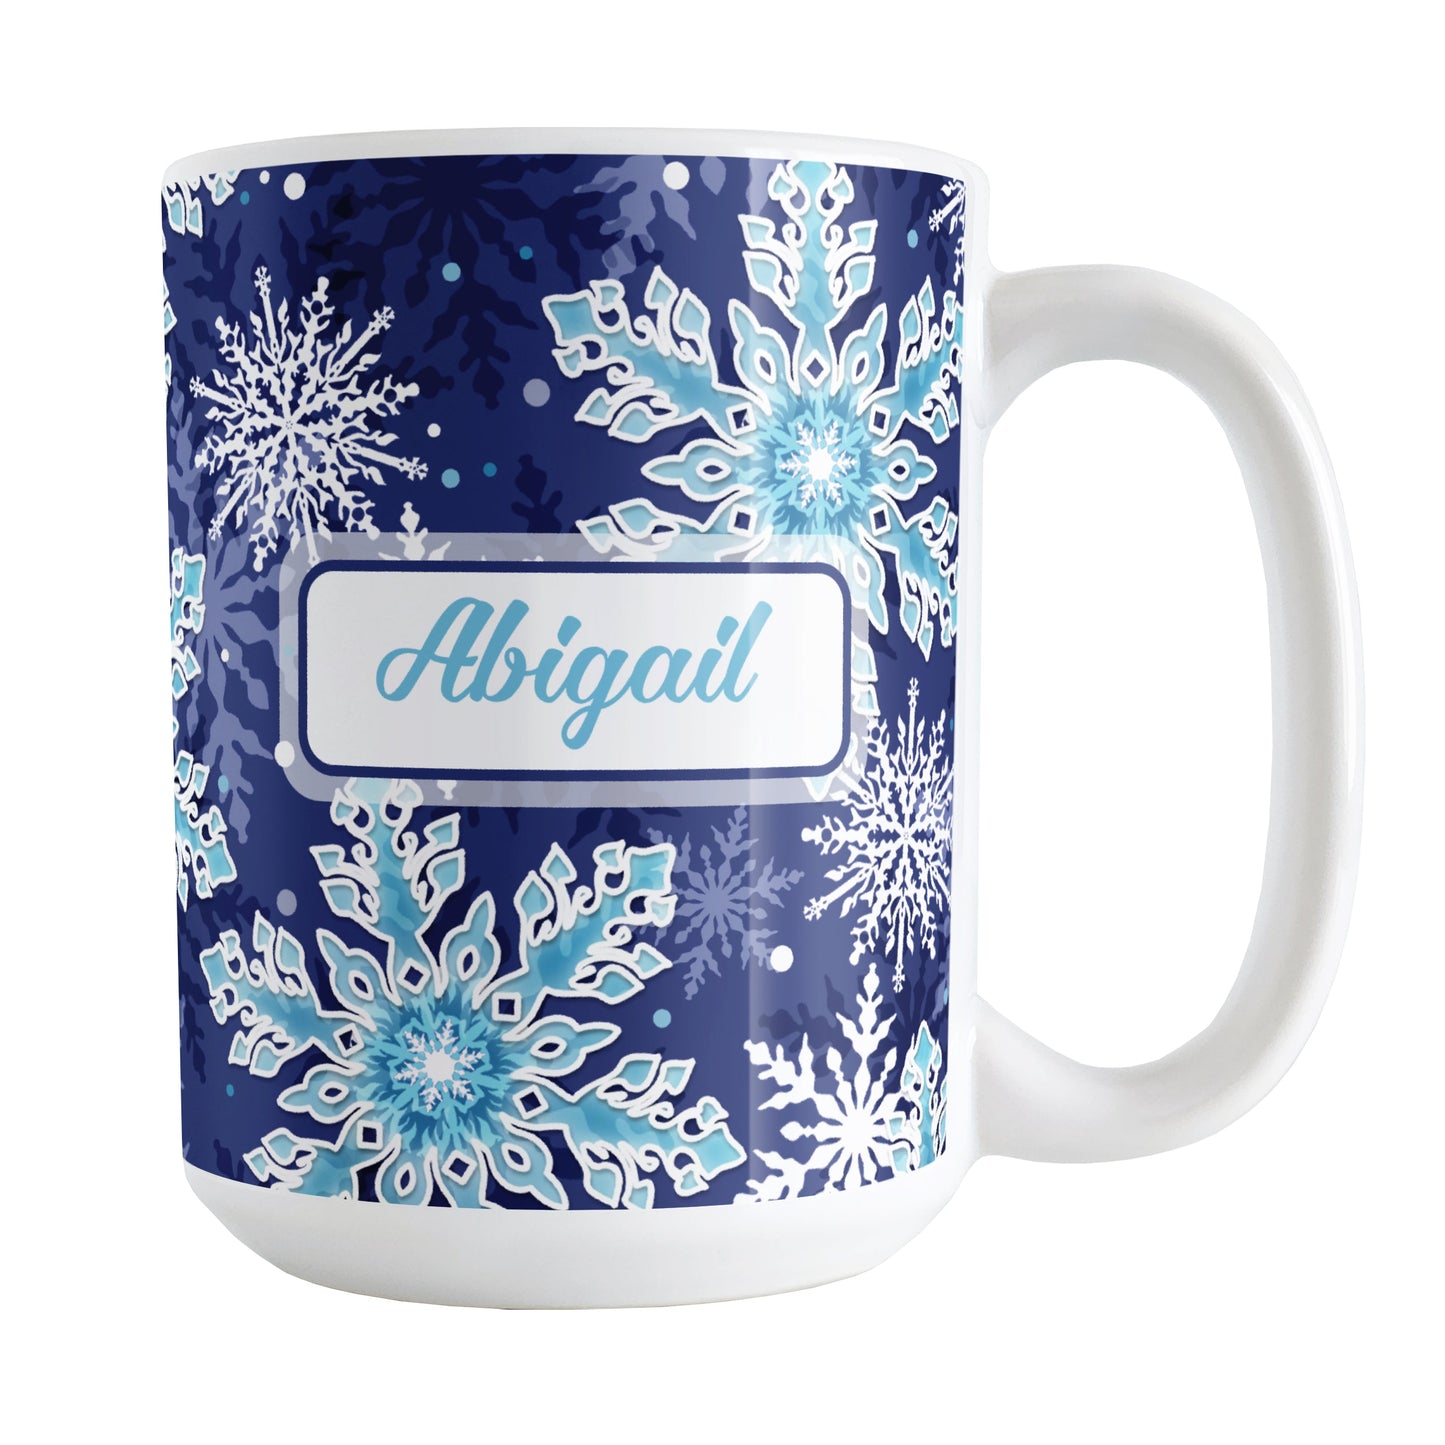 Personalized Navy Blue Aqua Snowflake Winter Mug (15oz) at Amy's Coffee Mugs. A ceramic coffee mug designed with a pattern of aqua blue and white snowflakes over a navy blue background color that wraps around the mug to the handle. 